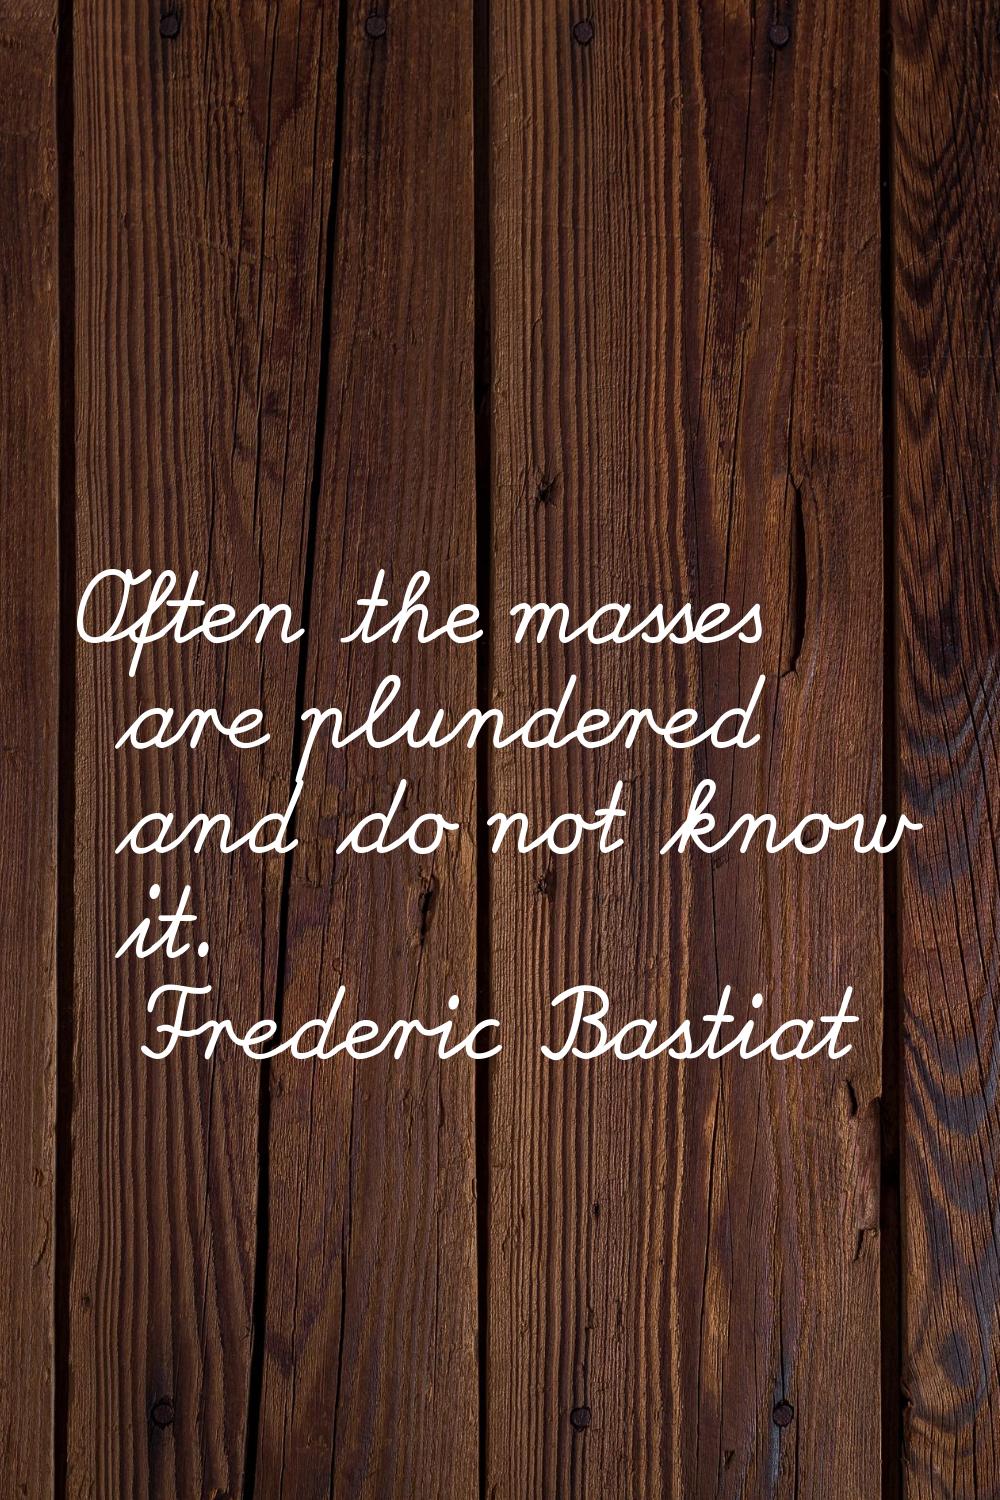 Often the masses are plundered and do not know it.